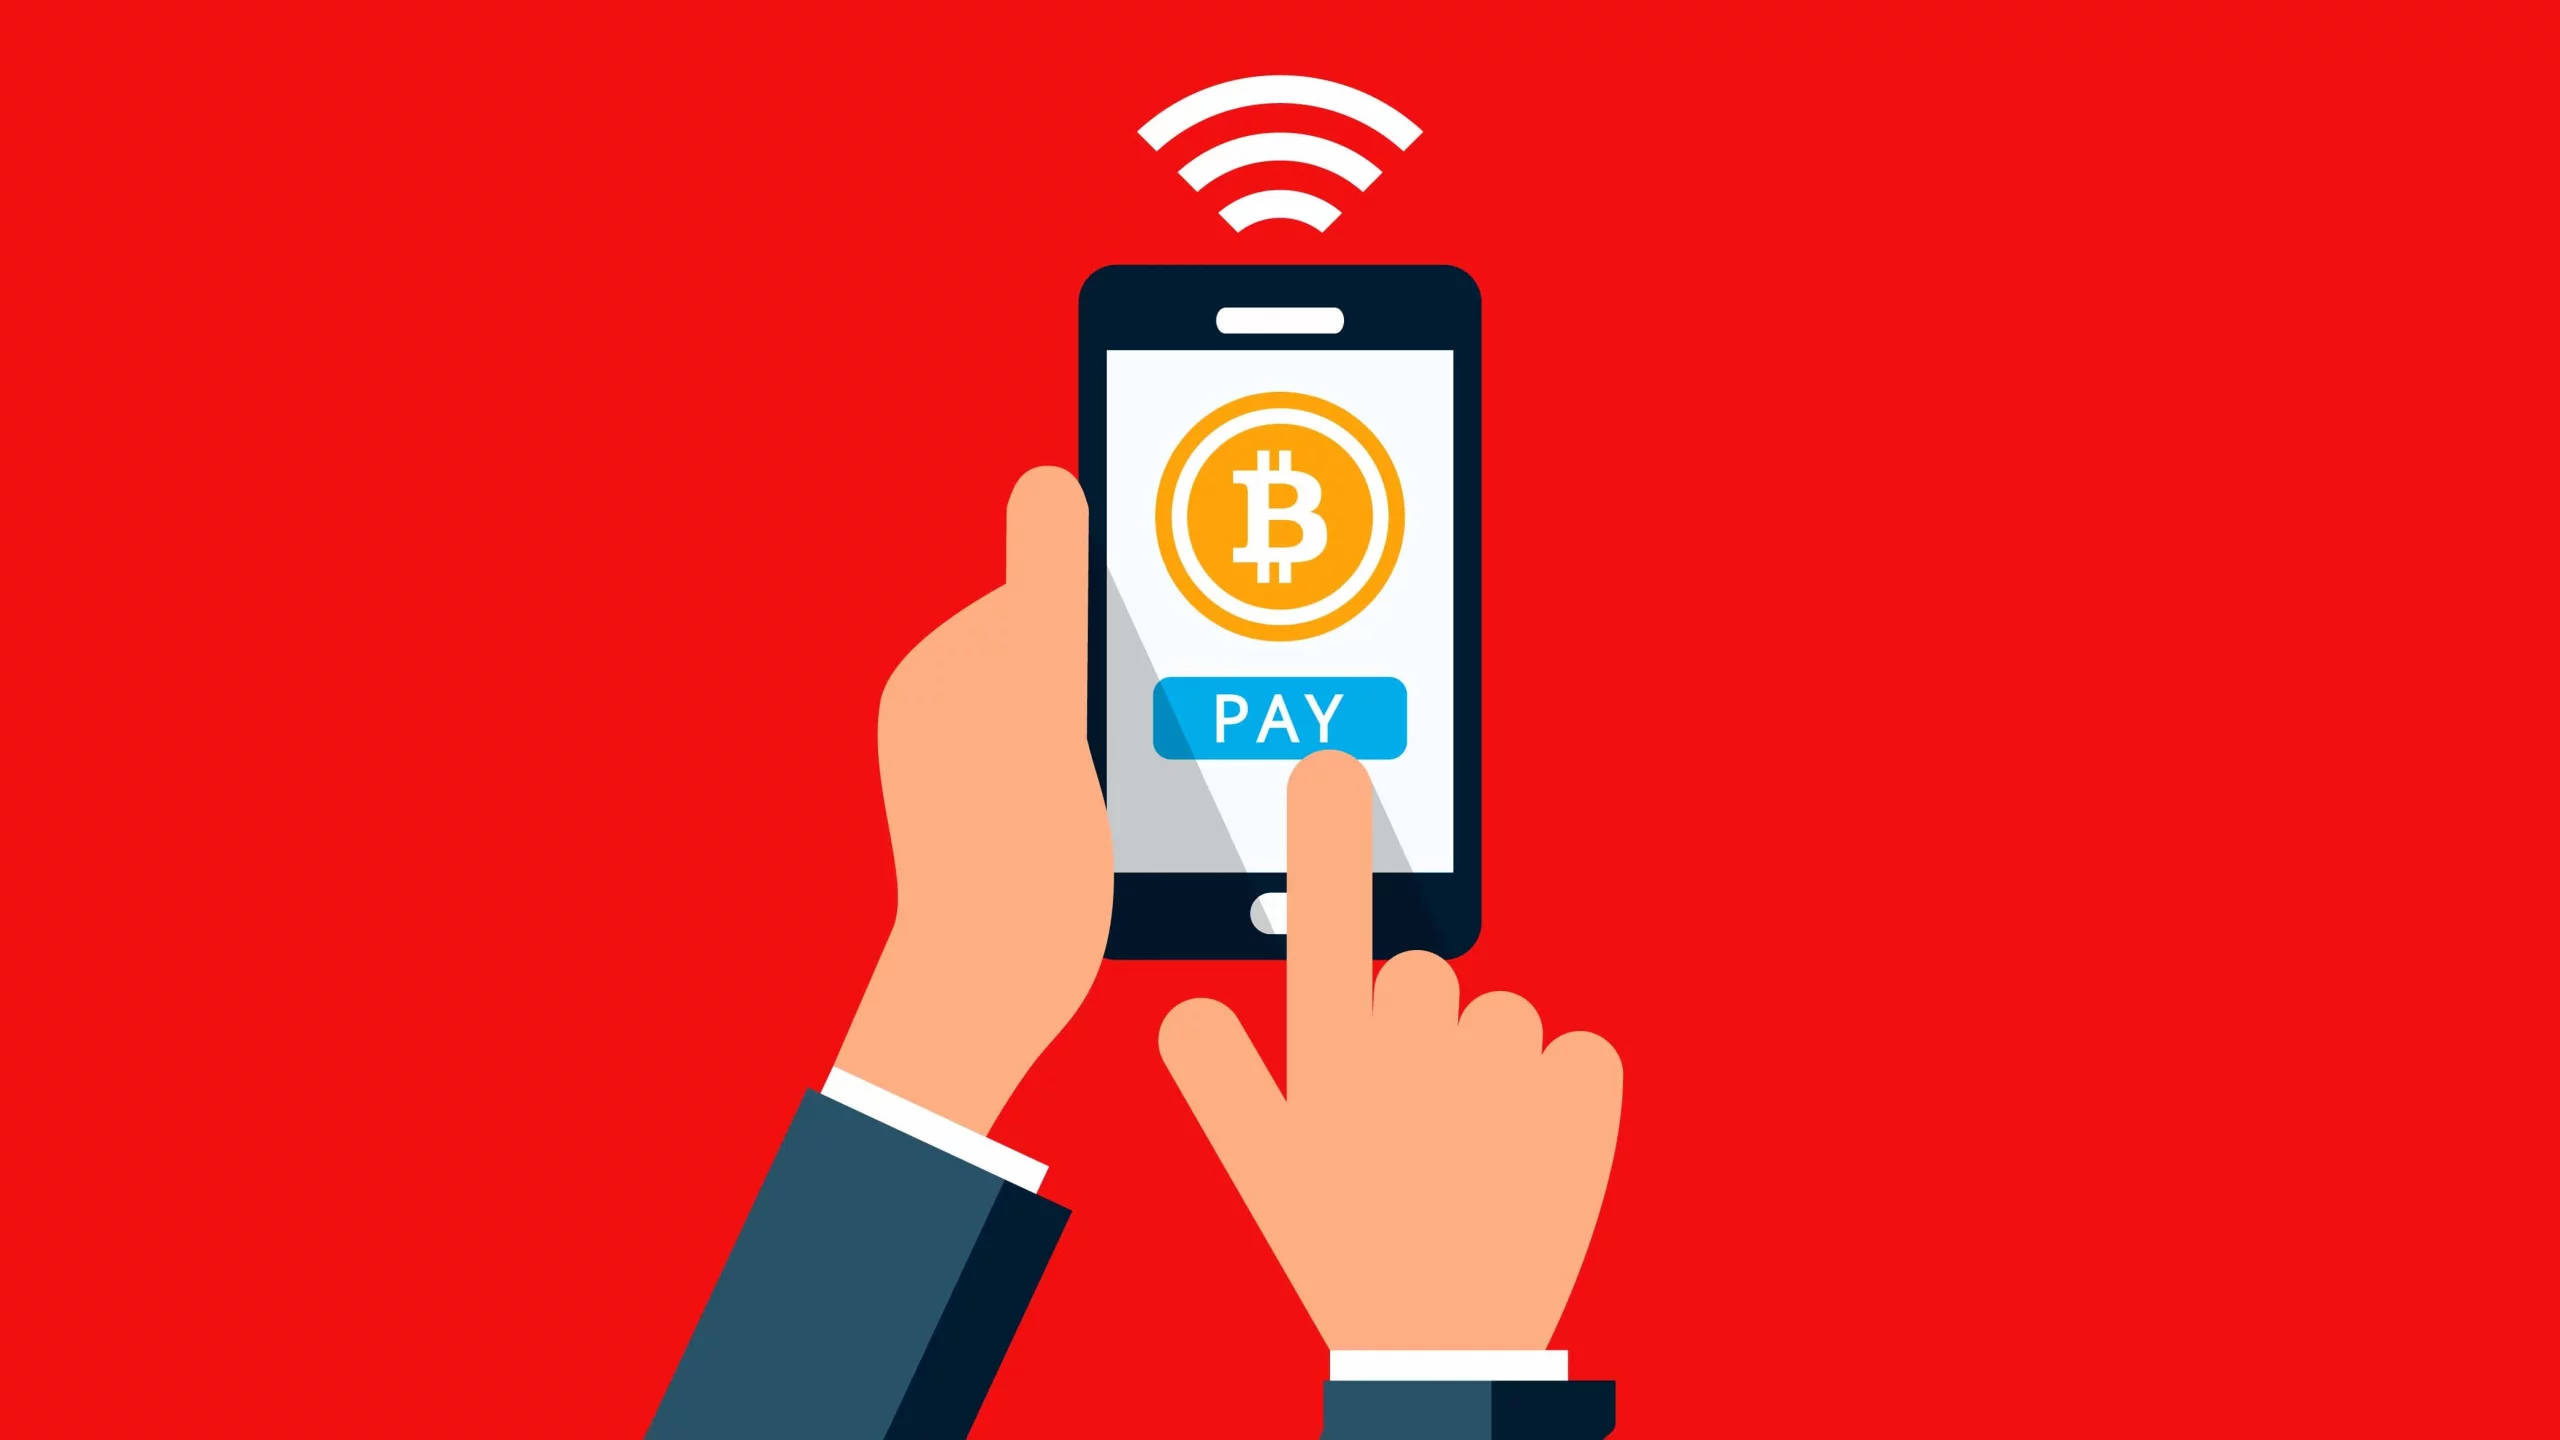 As a business, how cryptocurrency payments can be accepted